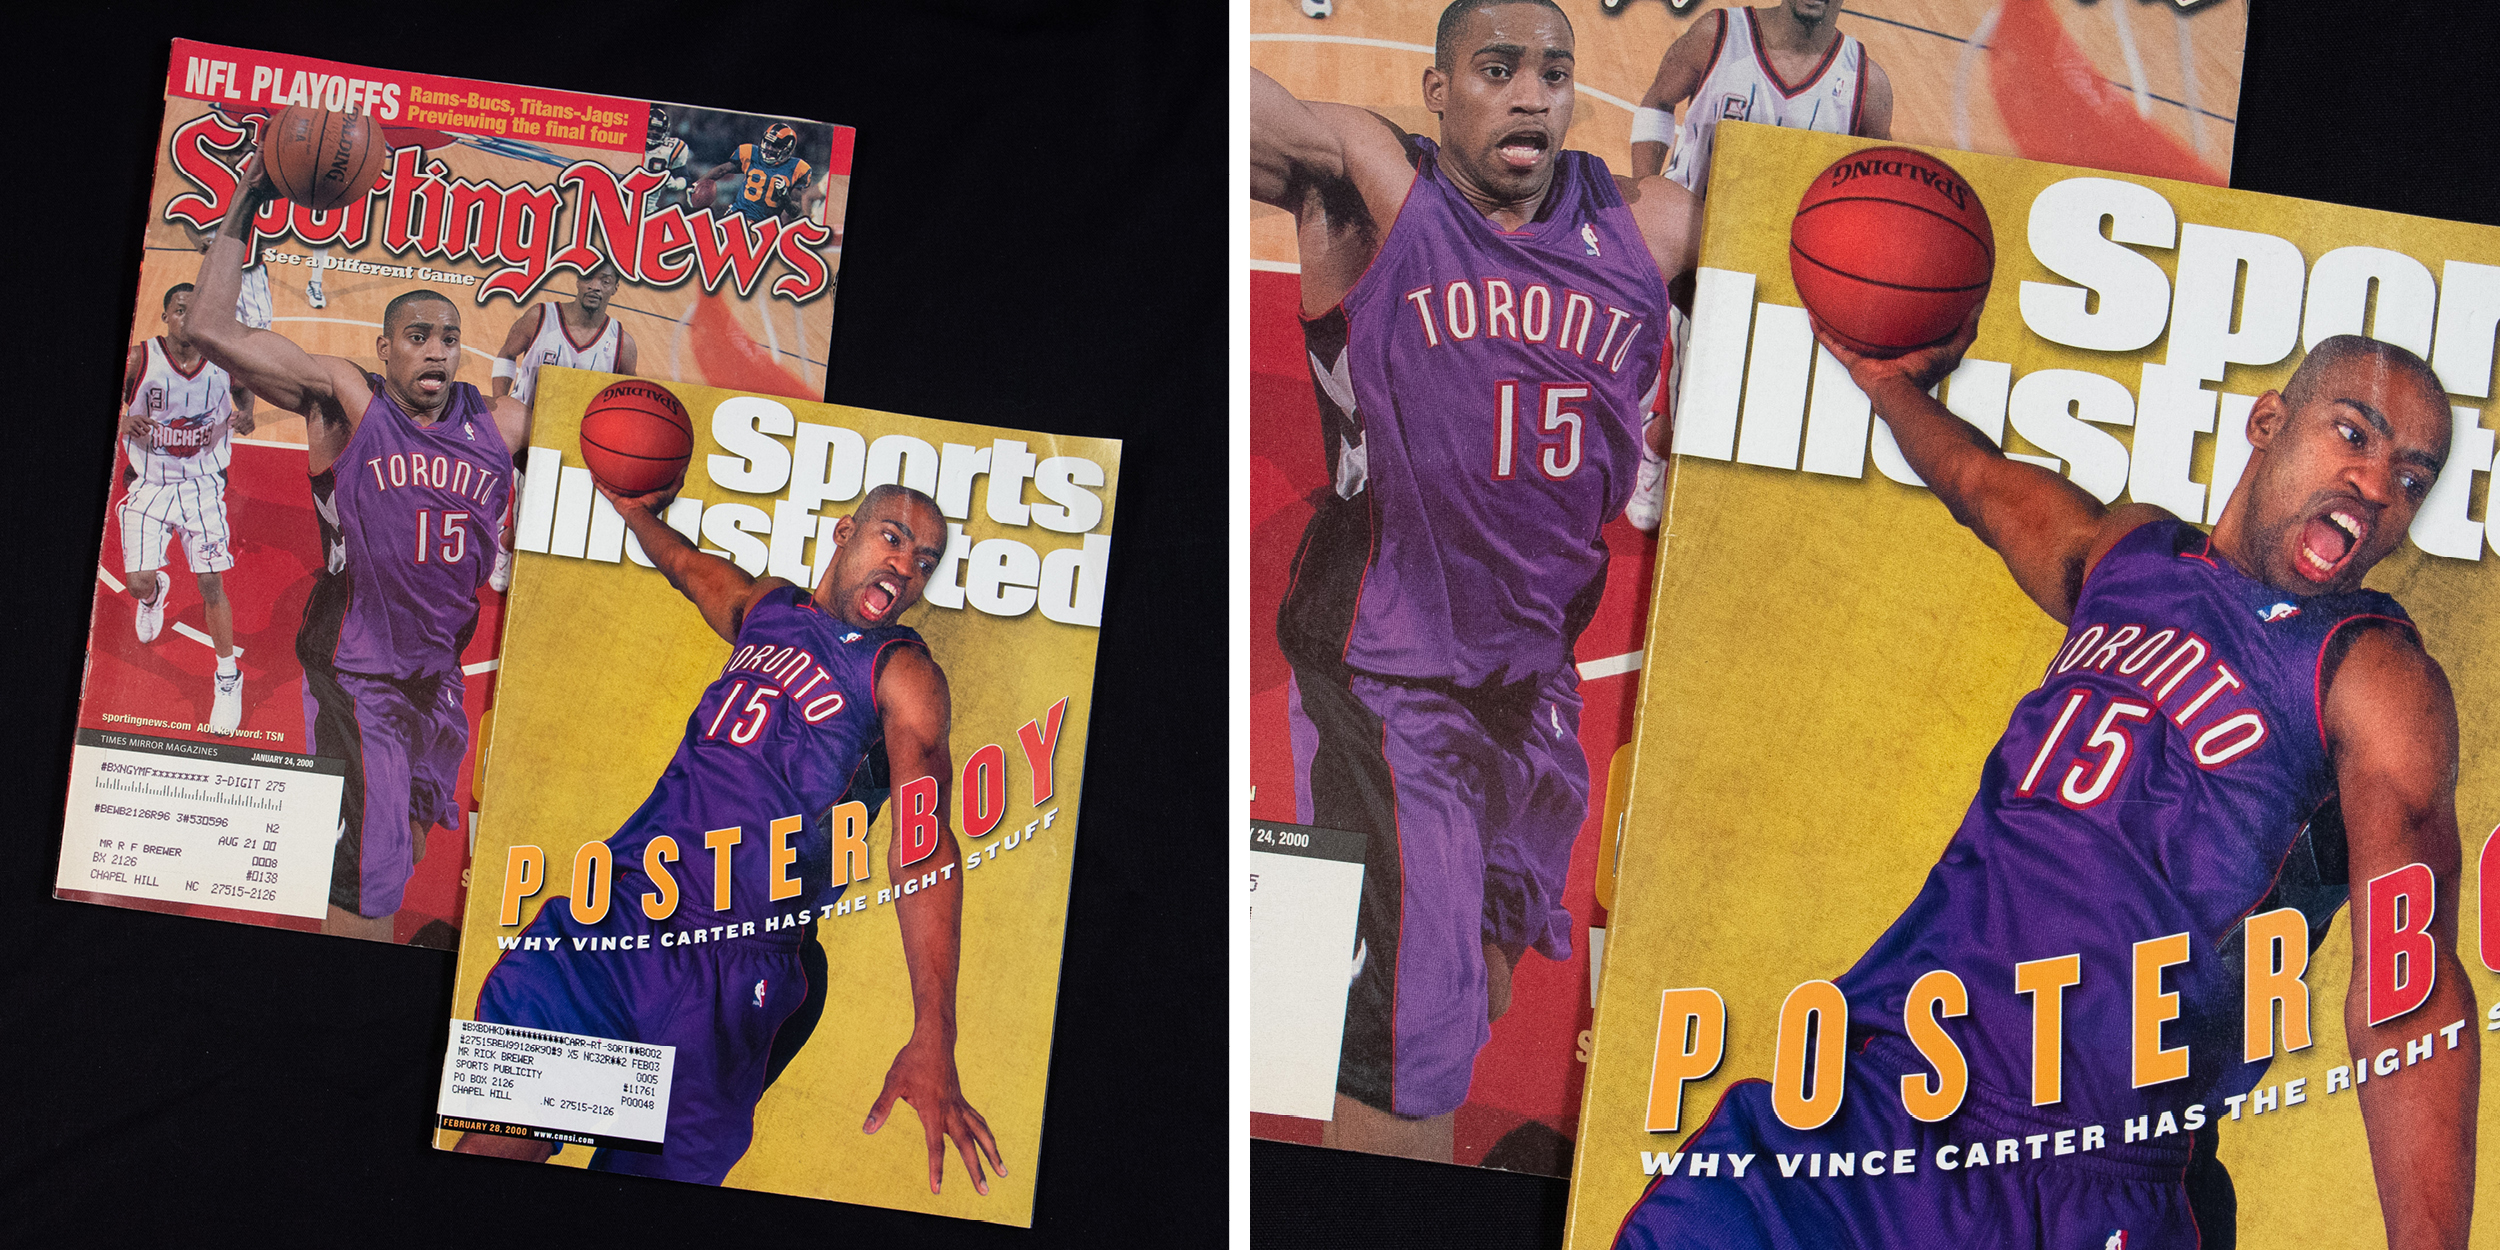 2 magazines laying side by side. One is Sporting News showing a black man flying in to dunk a basketball. The second magazine is a Sports Illustrated showing a photo of a black man jumping up with the basketball.